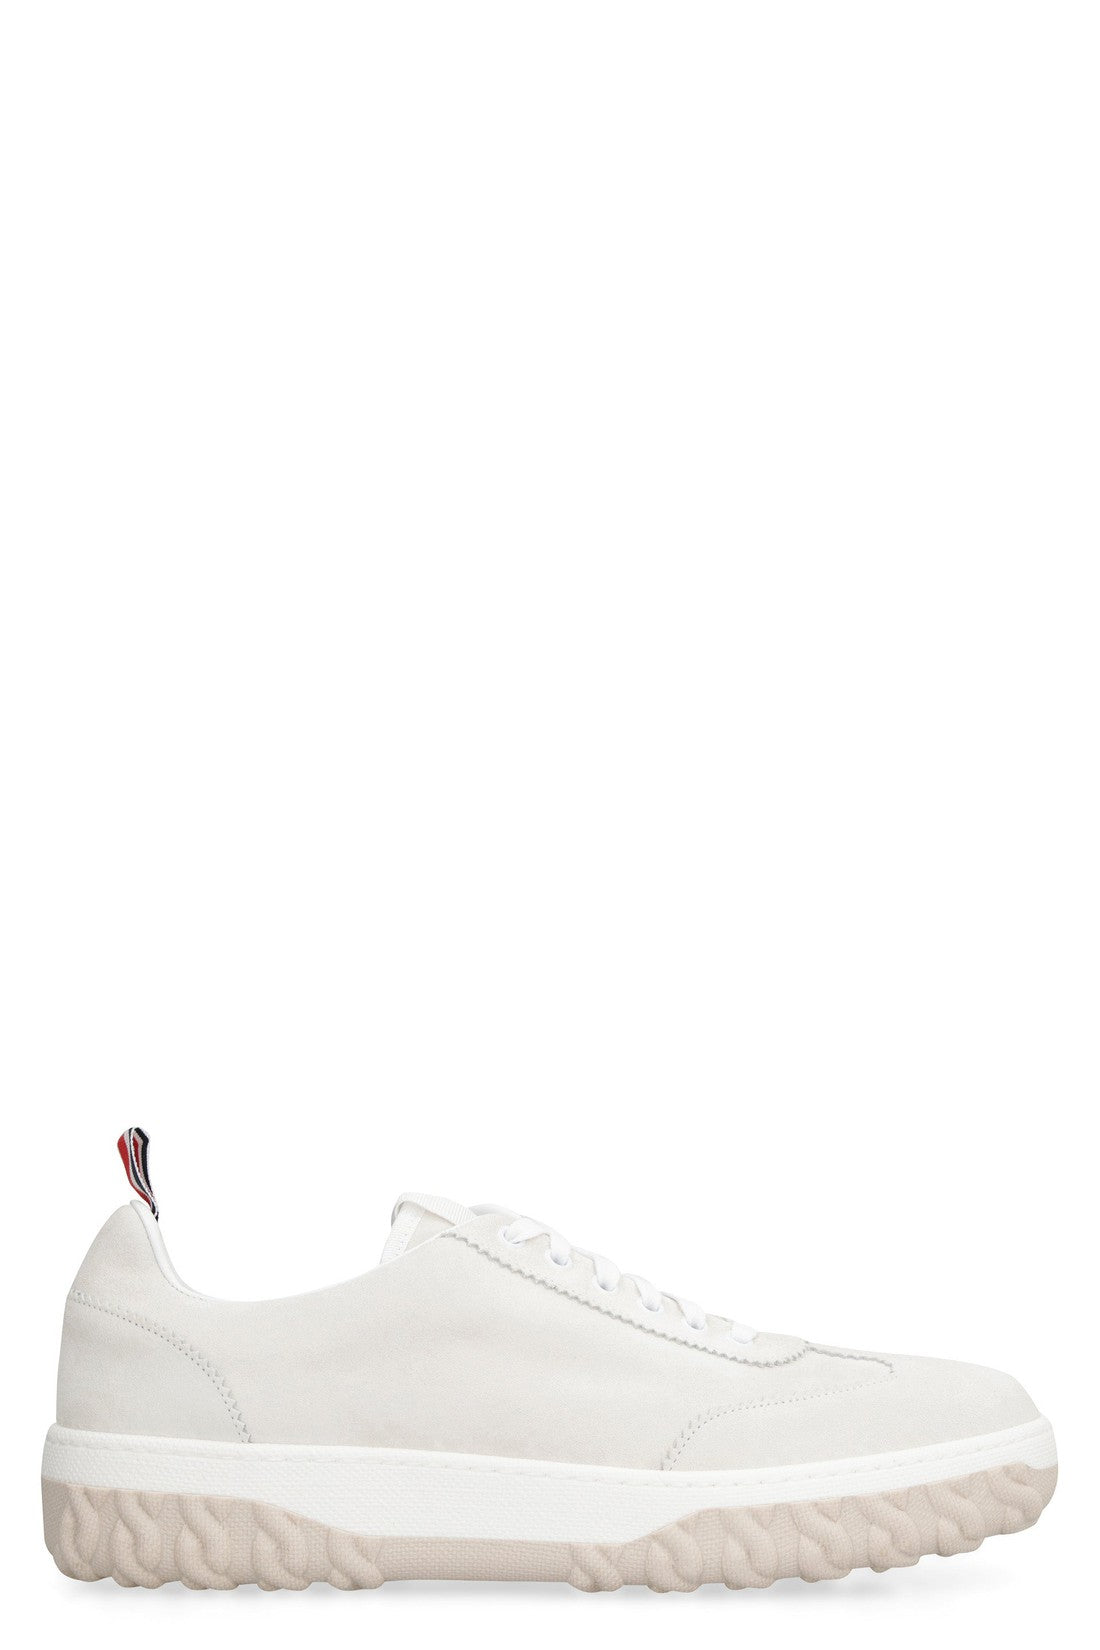 Thom Browne-OUTLET-SALE-Court low-top sneakers-ARCHIVIST